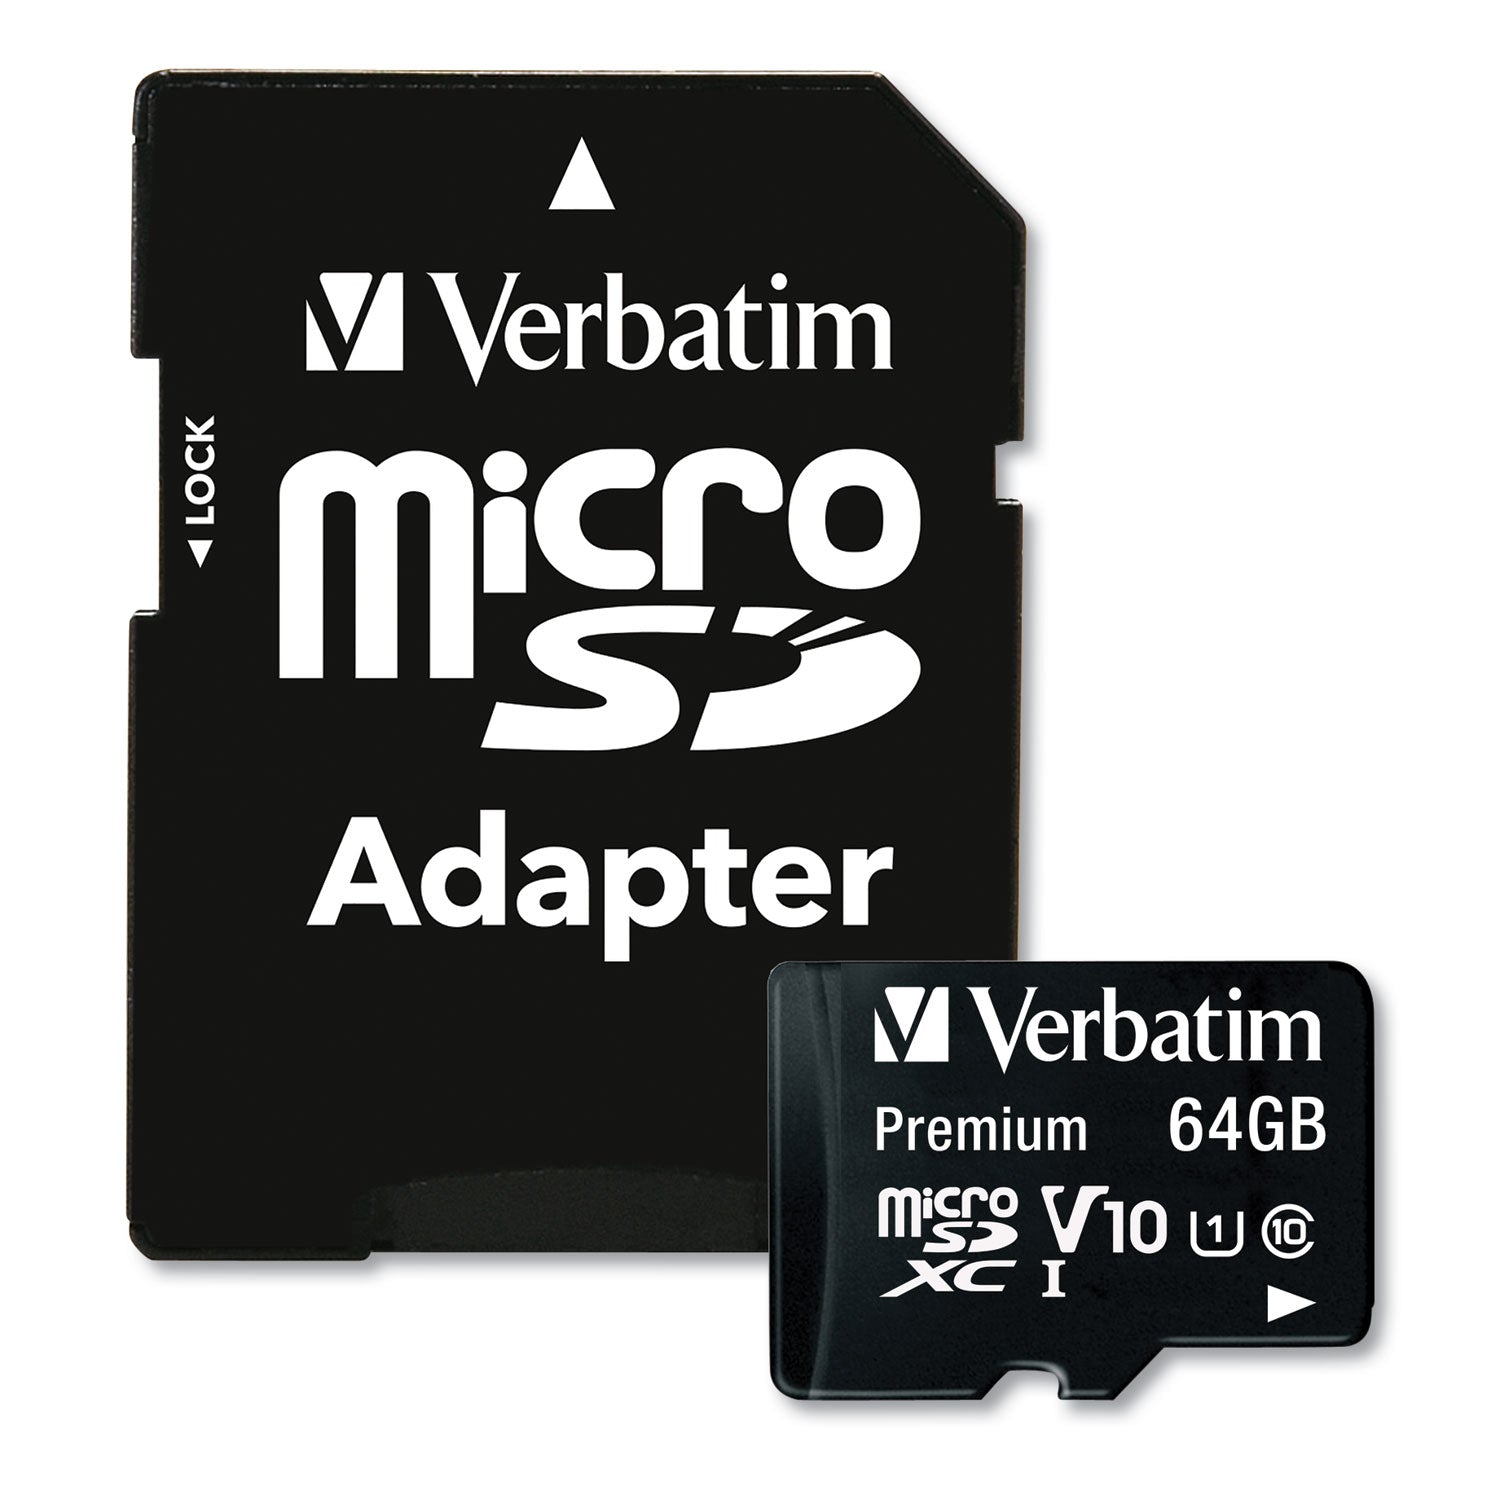 64GB Premium microSDXC Memory Card with Adapter, UHS-I V10 U1 Class 10, Up to 90MB/s Read Speed - 